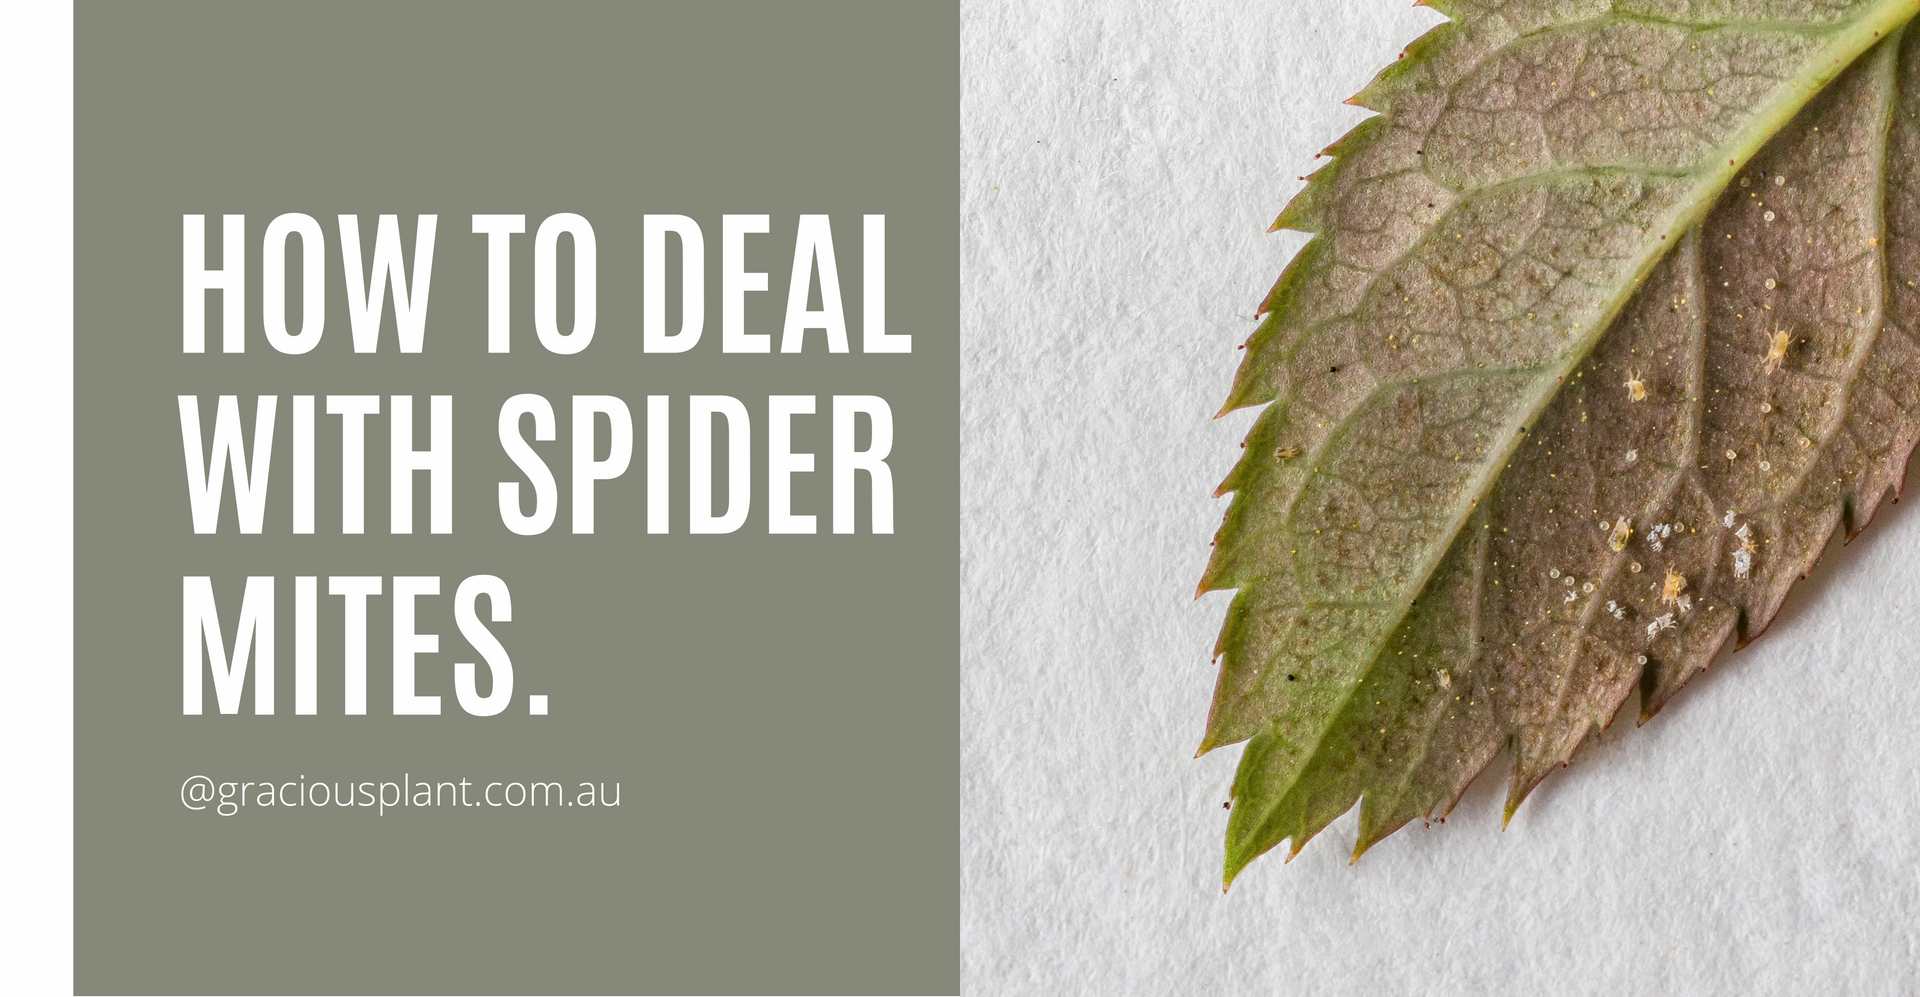 How to deal with spider mites